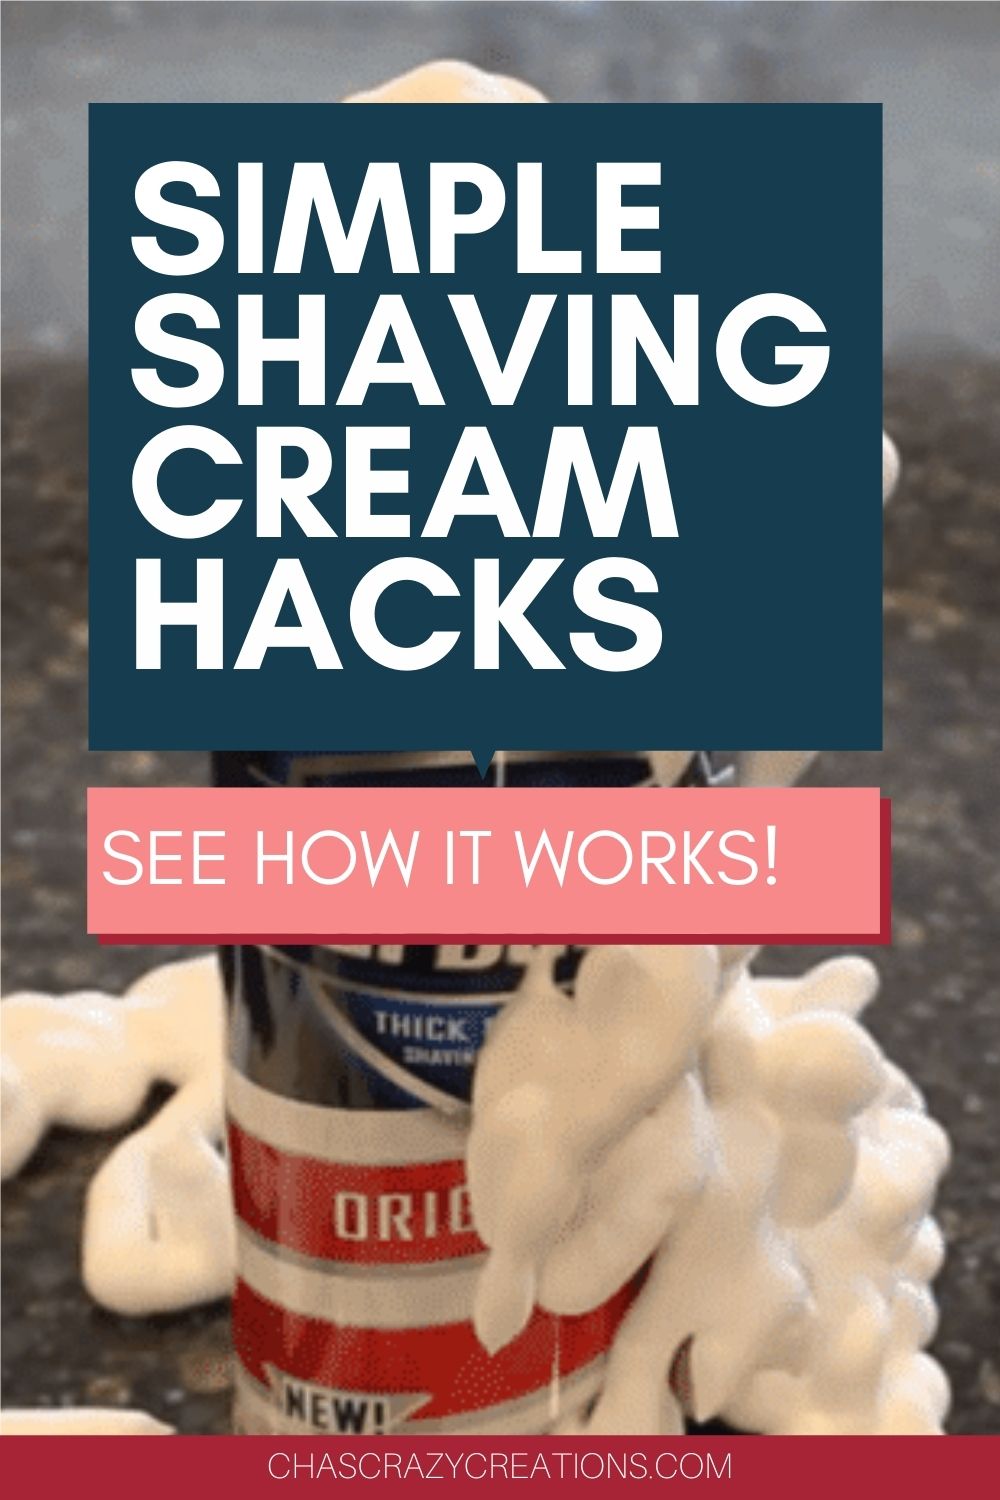 There are a lot of shaving cream hacks out there, and I have put some of those to the test and tried some of my own.  